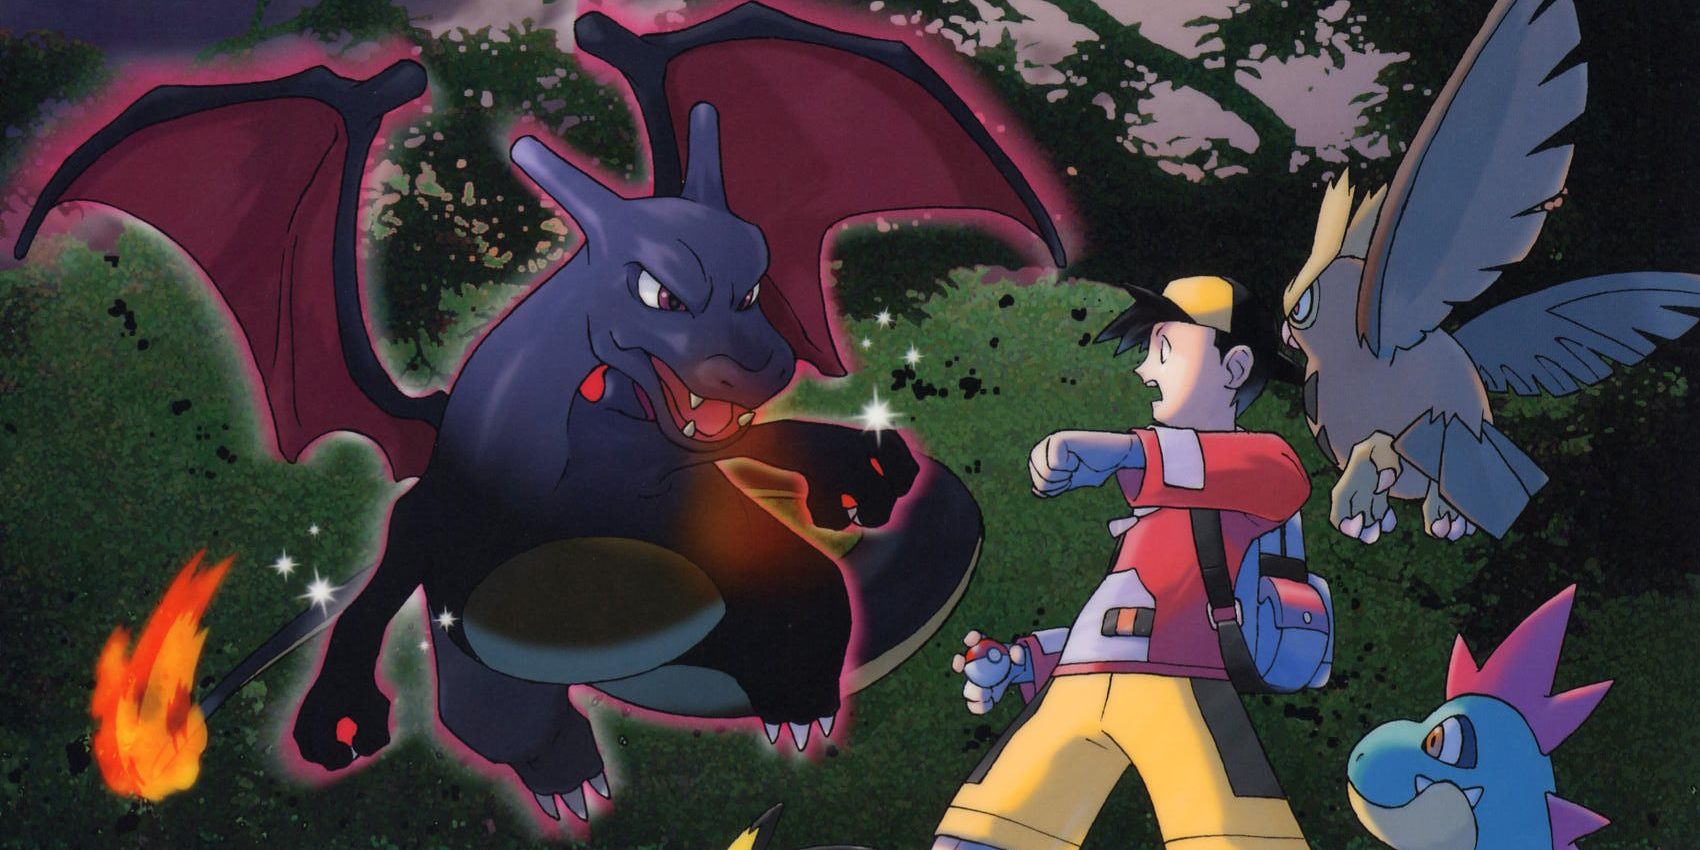 15 Things You Didn’t Know About Pokémon Black And White (And Their Sequels)